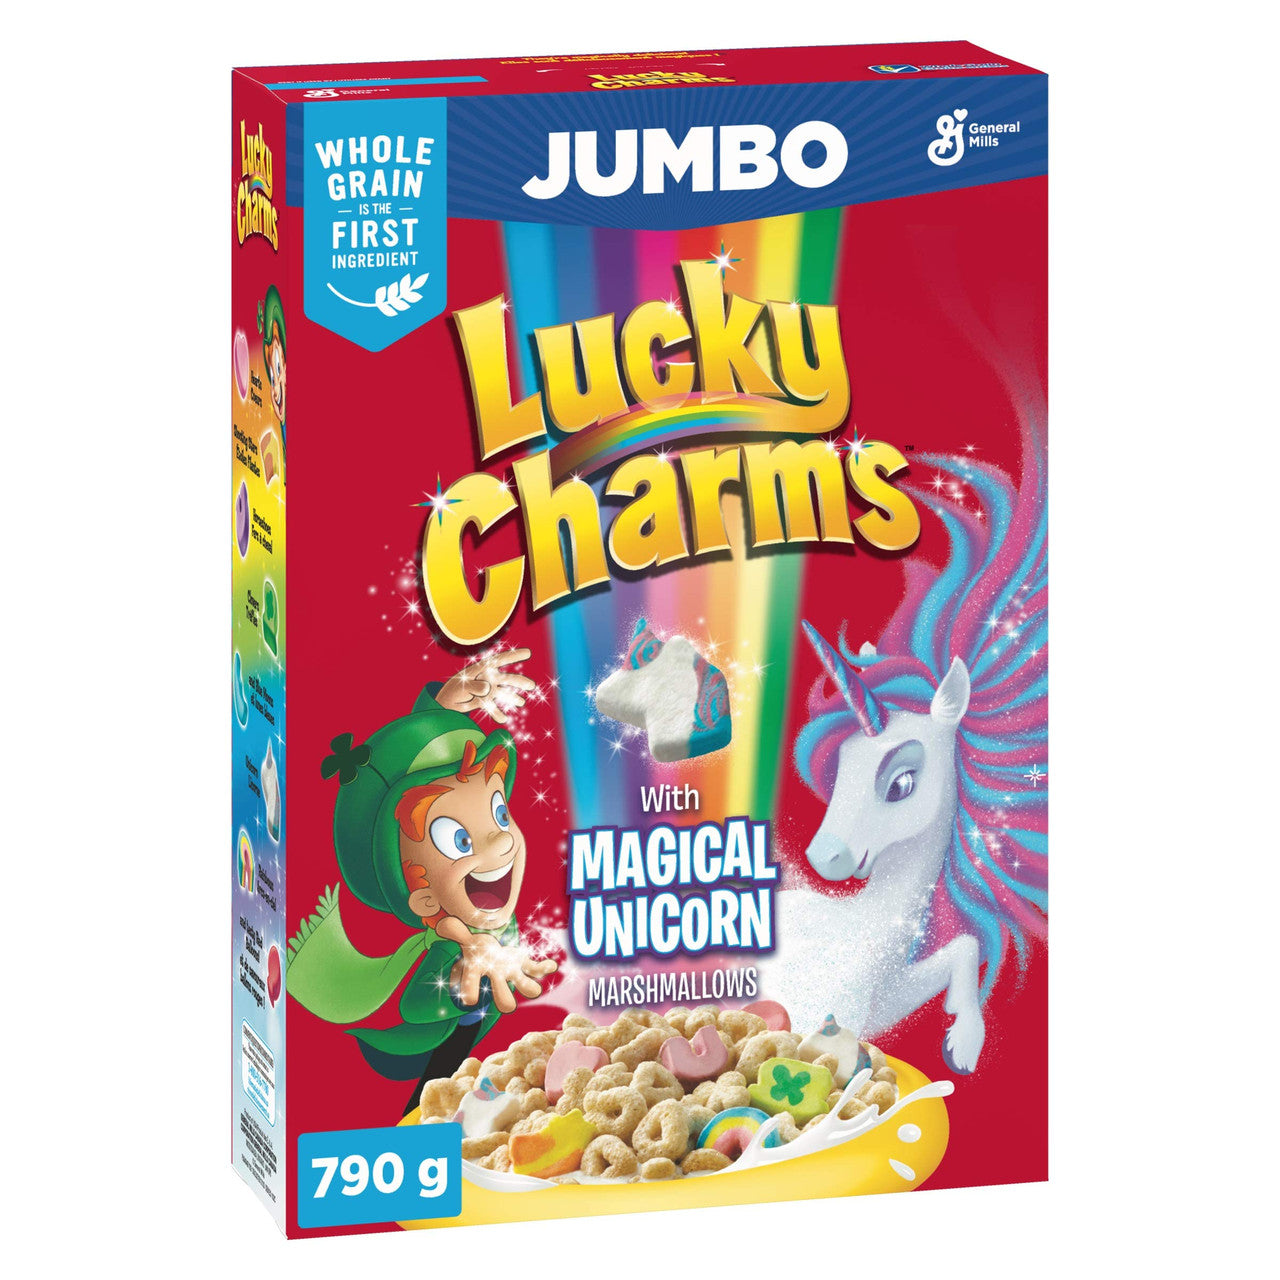 LUCKY CHARMS Cereal Jumbo Box, 790g/27.9 oz., {Imported from Canada}